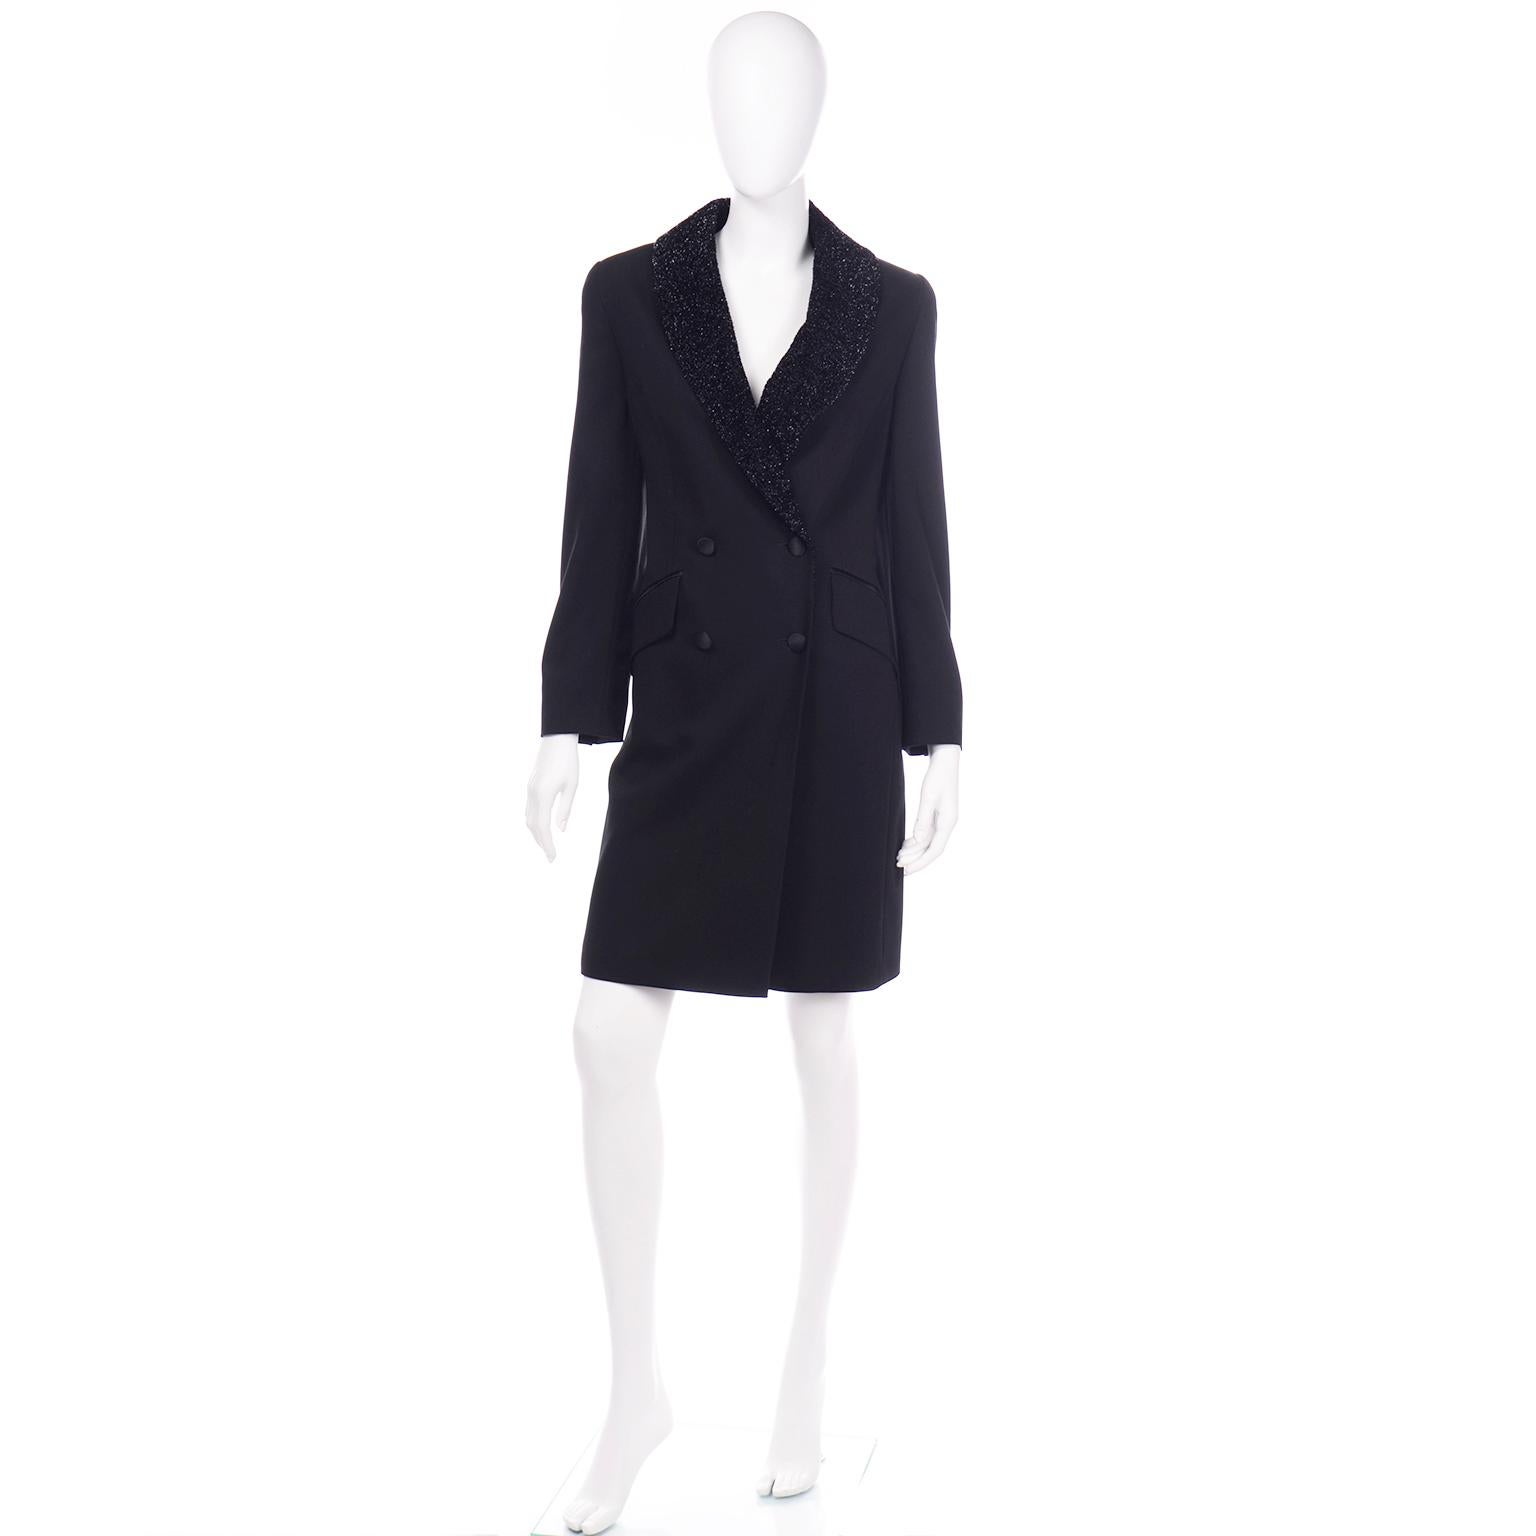 This stunning vintage Louis Féraud evening coat is so much more beautiful in person! It's hard to capture this gorgeous piece in photographs, especially since it is black, which is always difficult! This  is a blazer style long black wool coat with